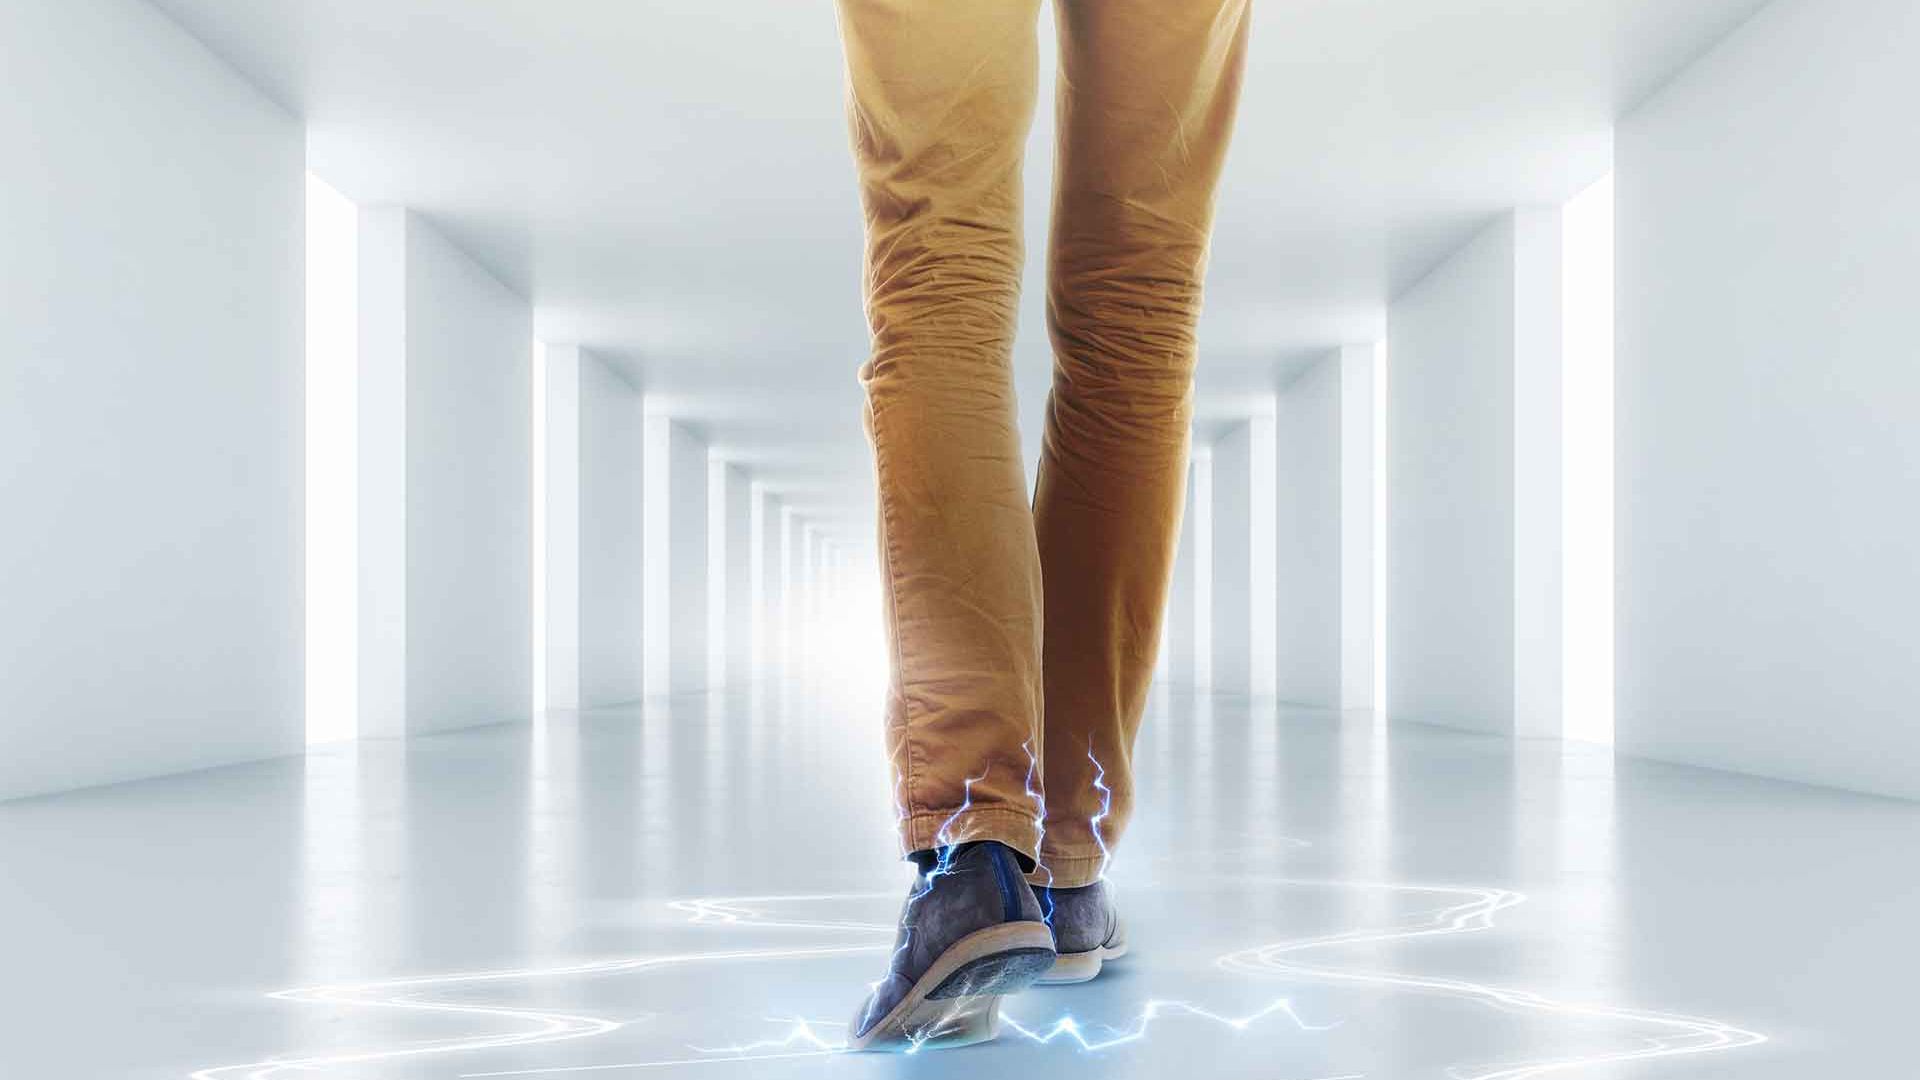 Shoes walking on white conductive floor